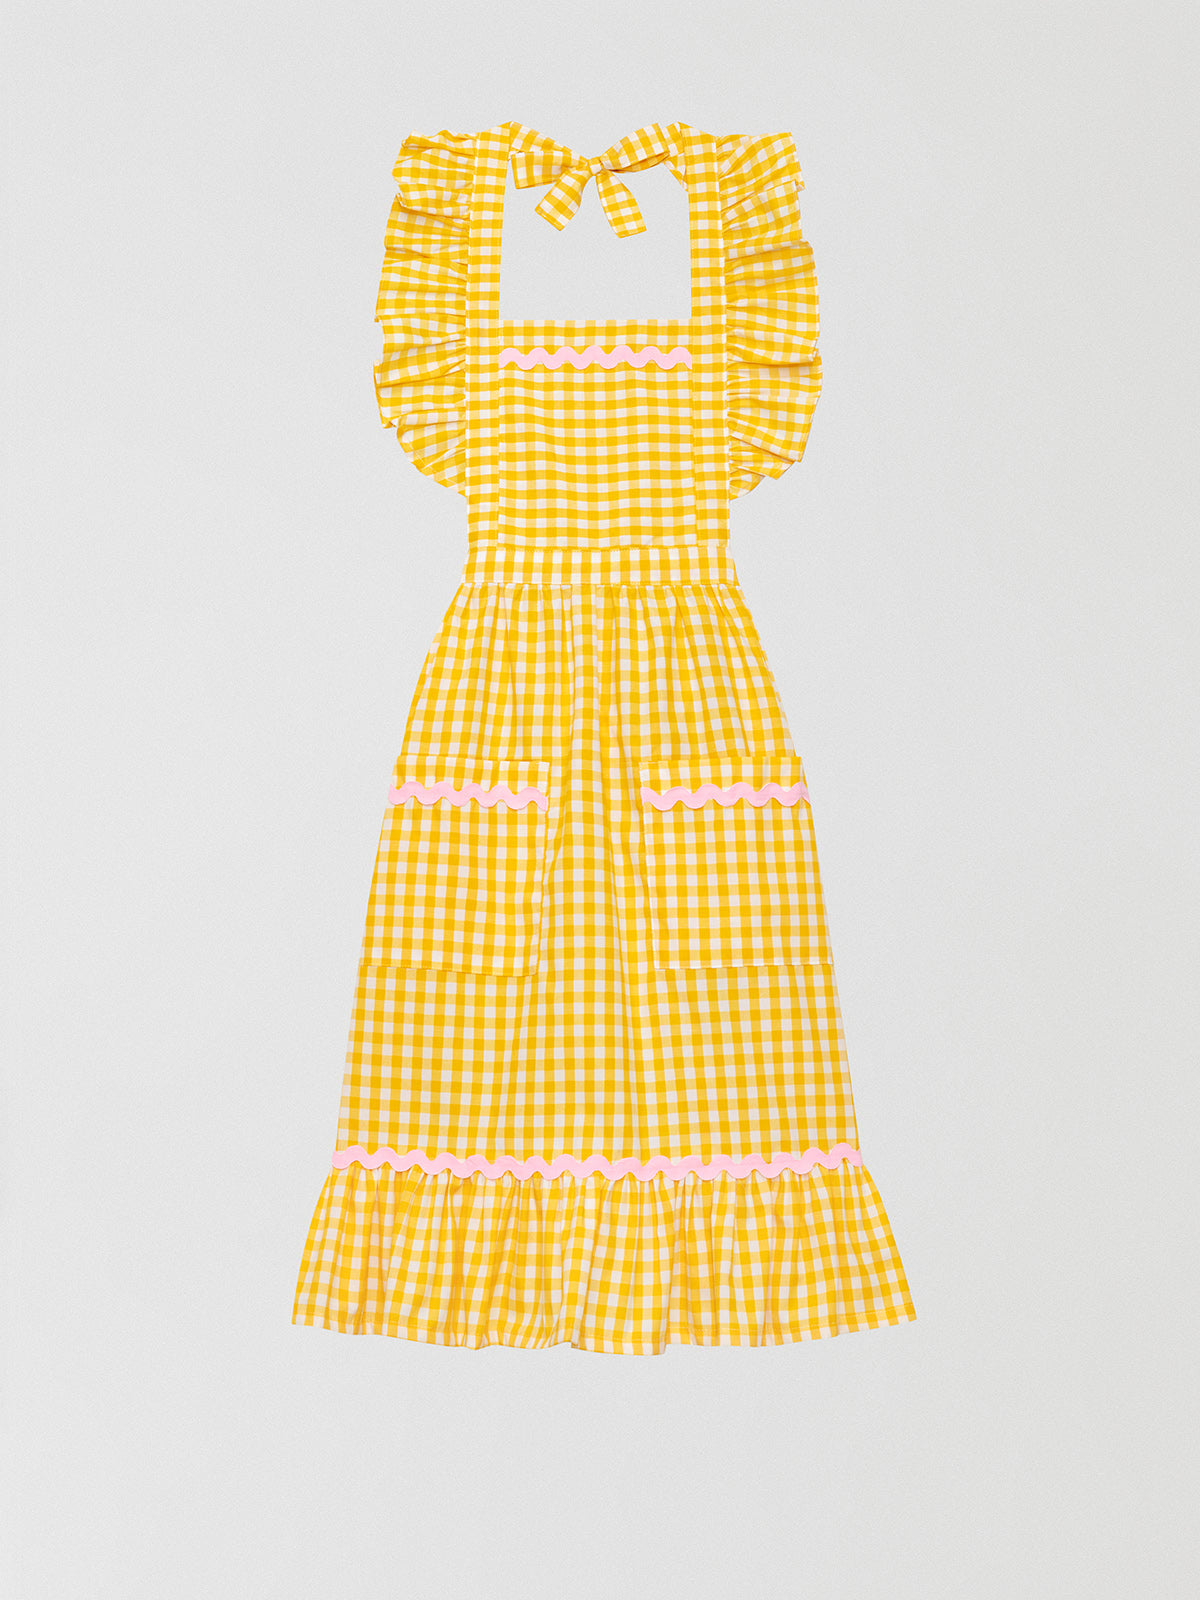 Cocinitas Apron Yellow is a yellow vichy apron with baby pink trim details on the skirt and front pockets.